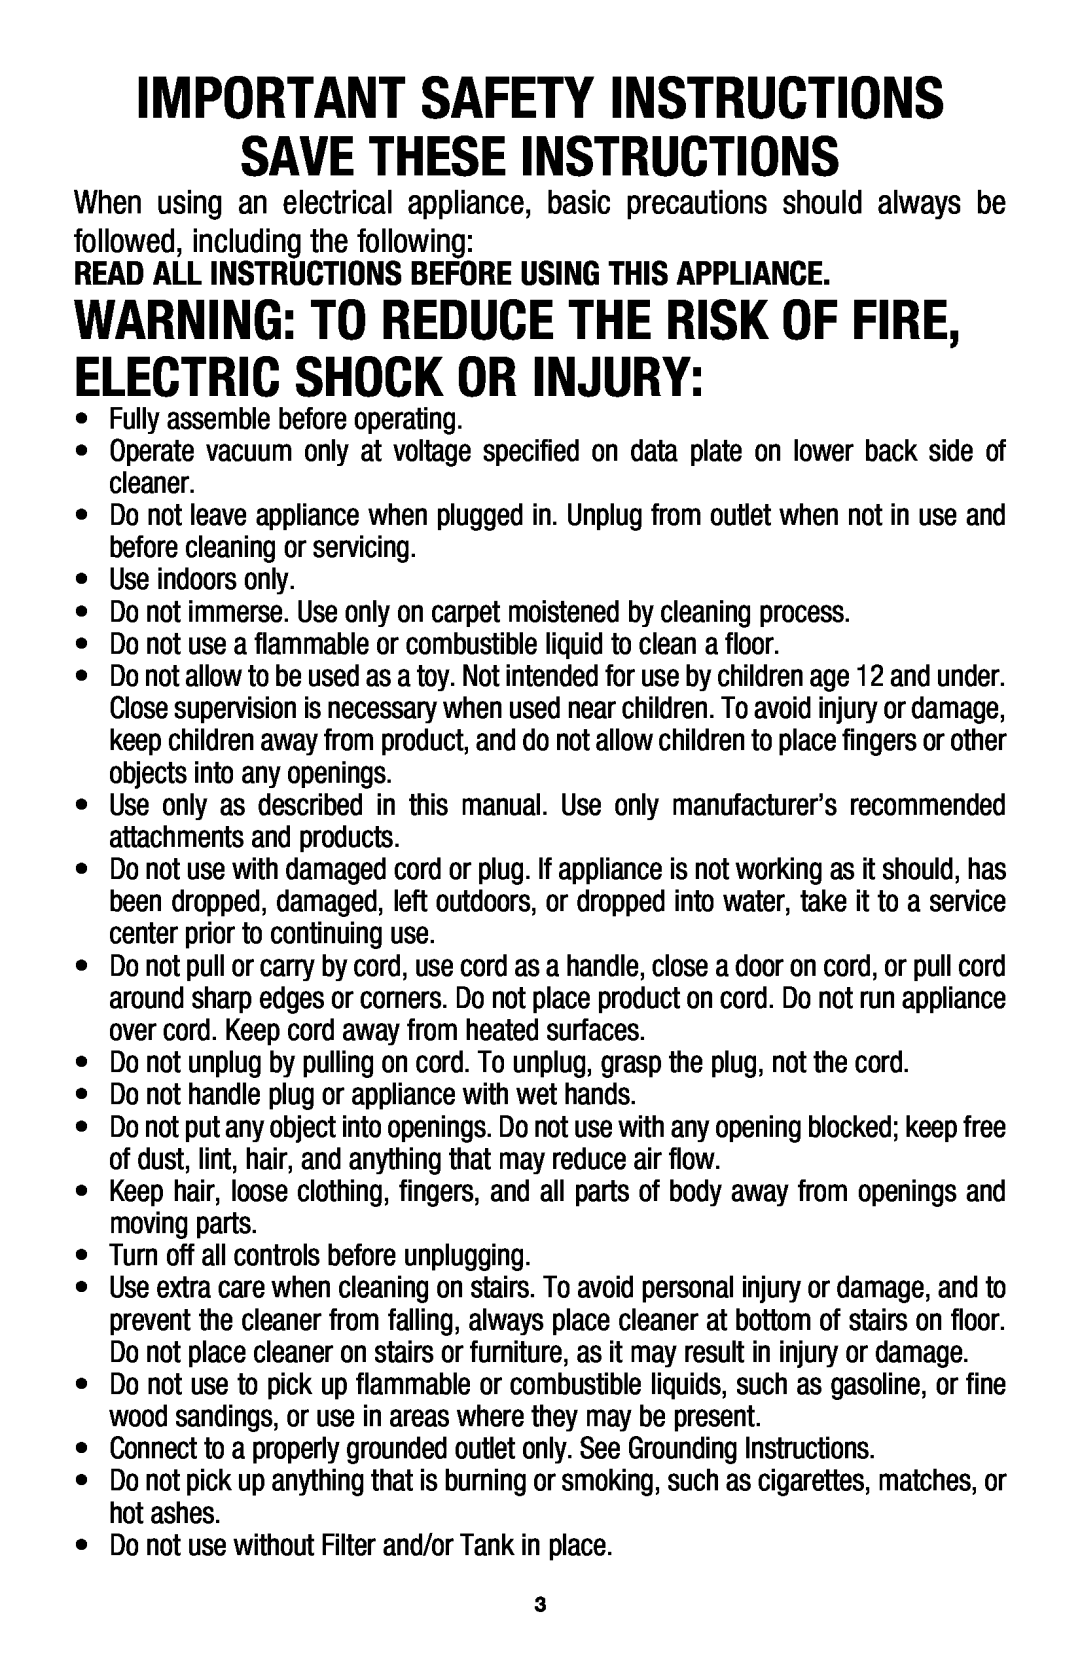 Hoover E1 Save These Instructions, Read All Instructions Before Using This Appliance, Important Safety Instructions 